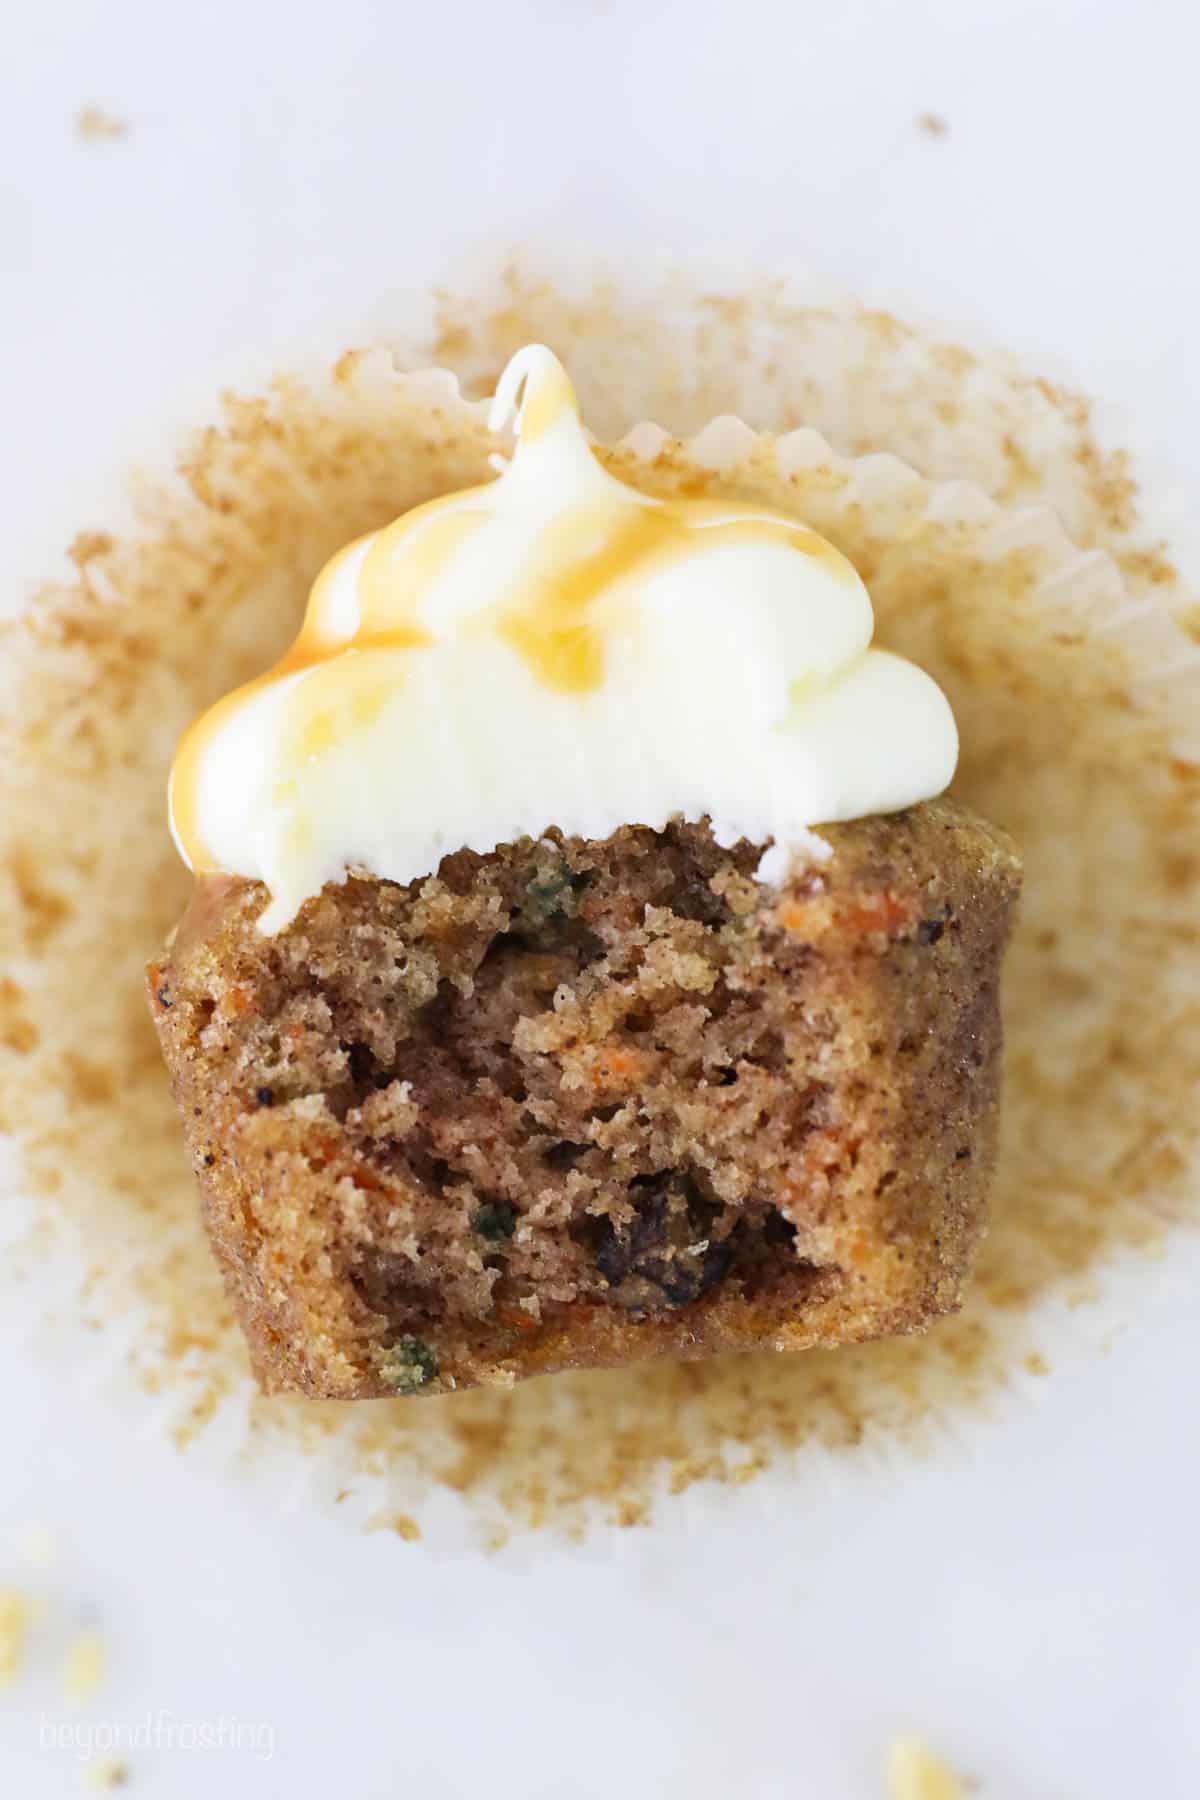 A carrot cake cupcake laying on its side with a bite missing